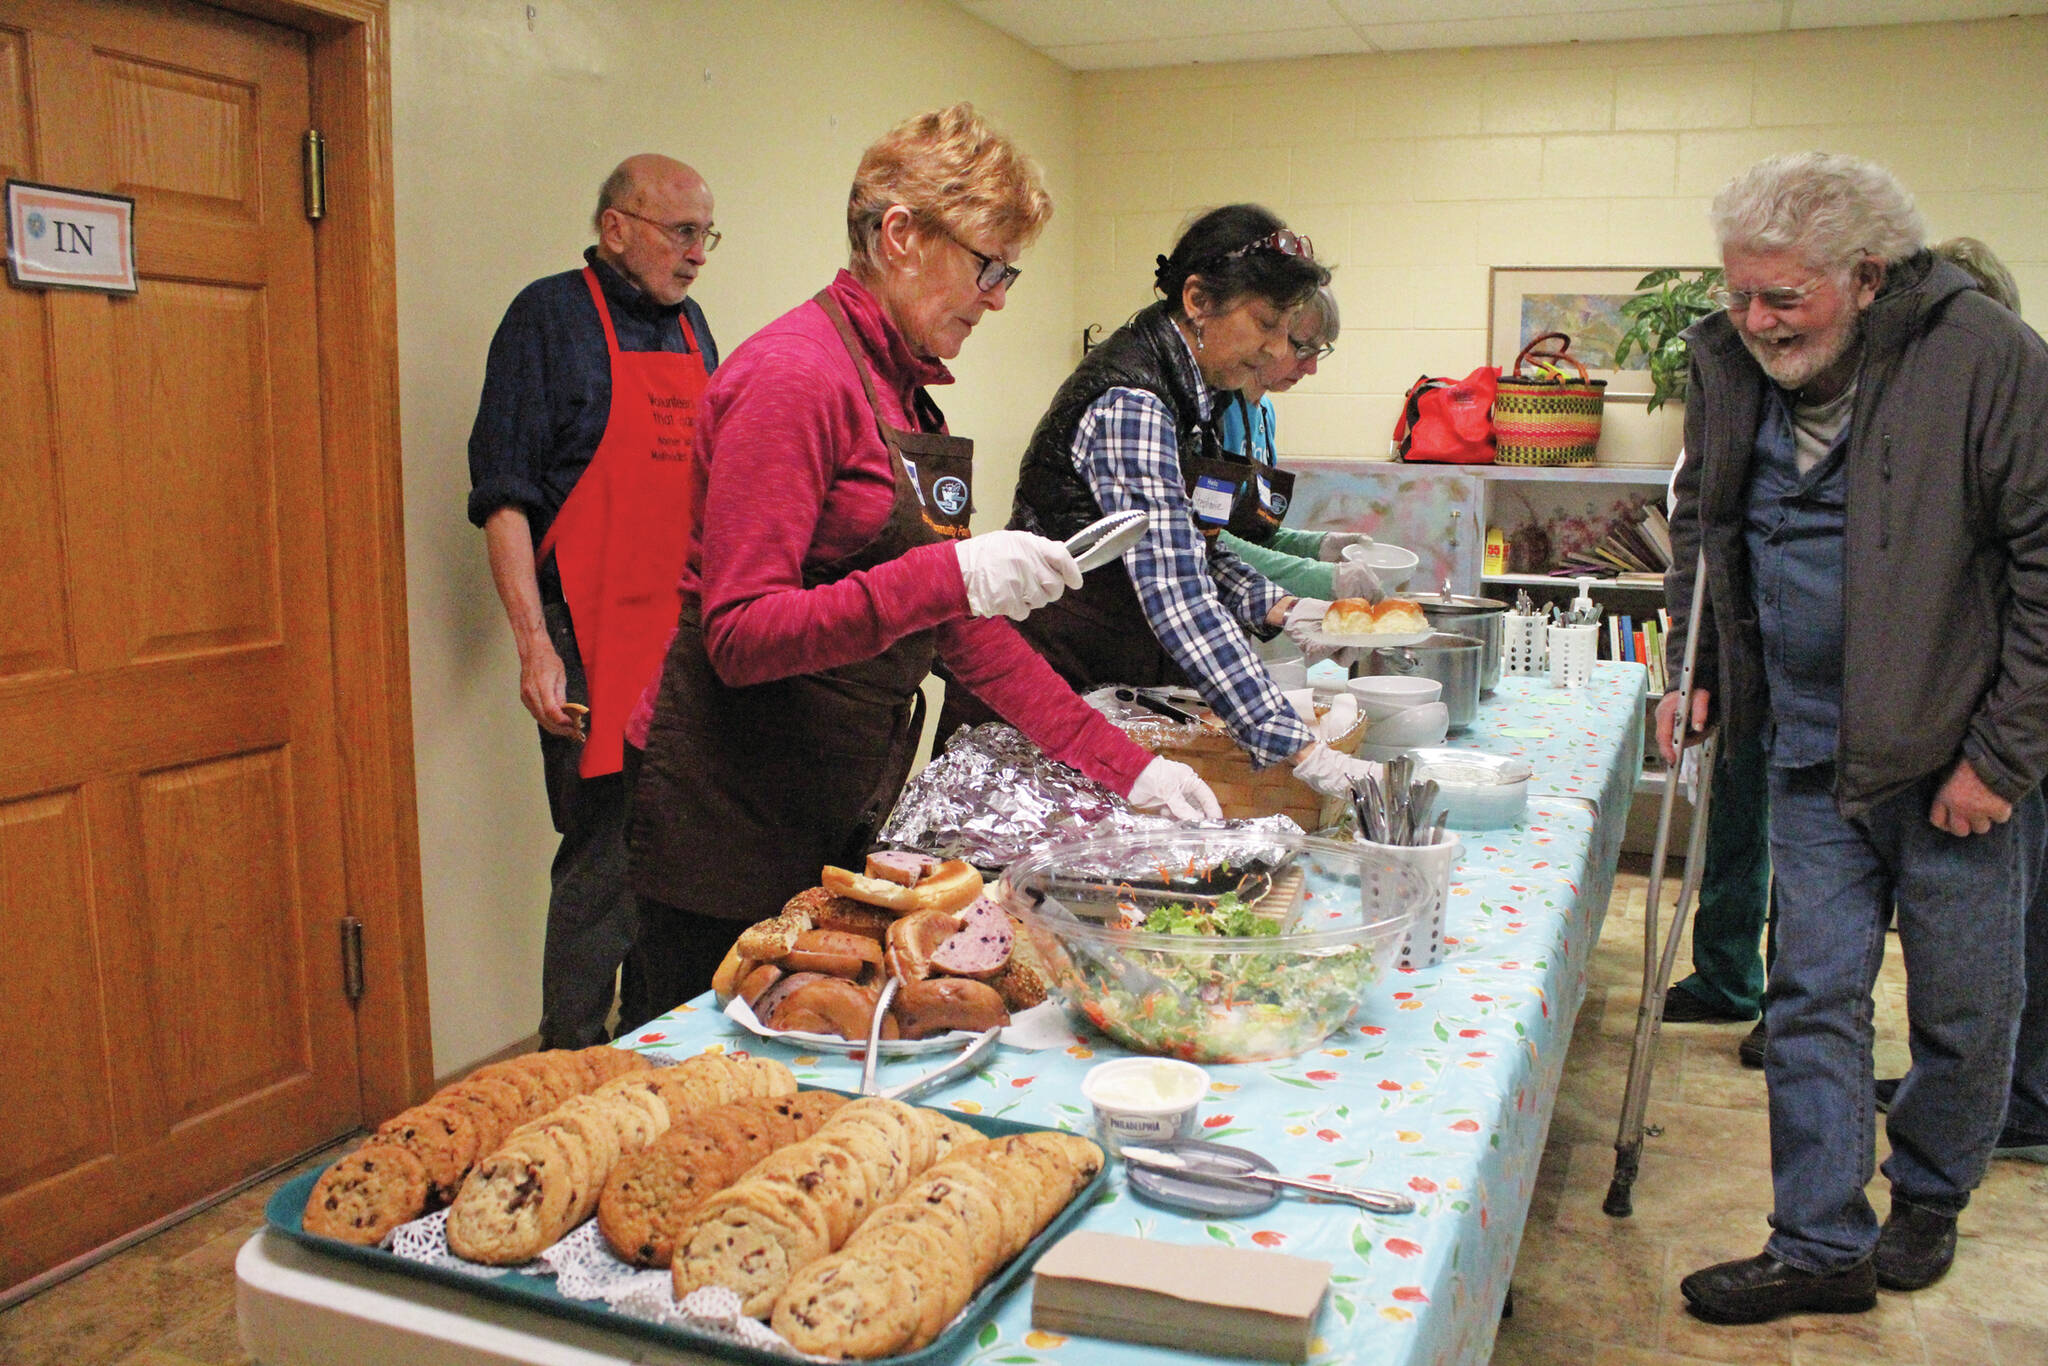 Volunteers distibute a meal to attendees at Project Homeless Connect on Jan. 29, 2020, at Homer United Methodist Church in Homer, Alaska. Dubbed Community Resource Connect (CRC) this year, the free, one-day event is intended for those who are homeless, at risk of being homeless, or for those in need of extra support for their daily living situation. (Photo by Megan Pacer/Homer News file)